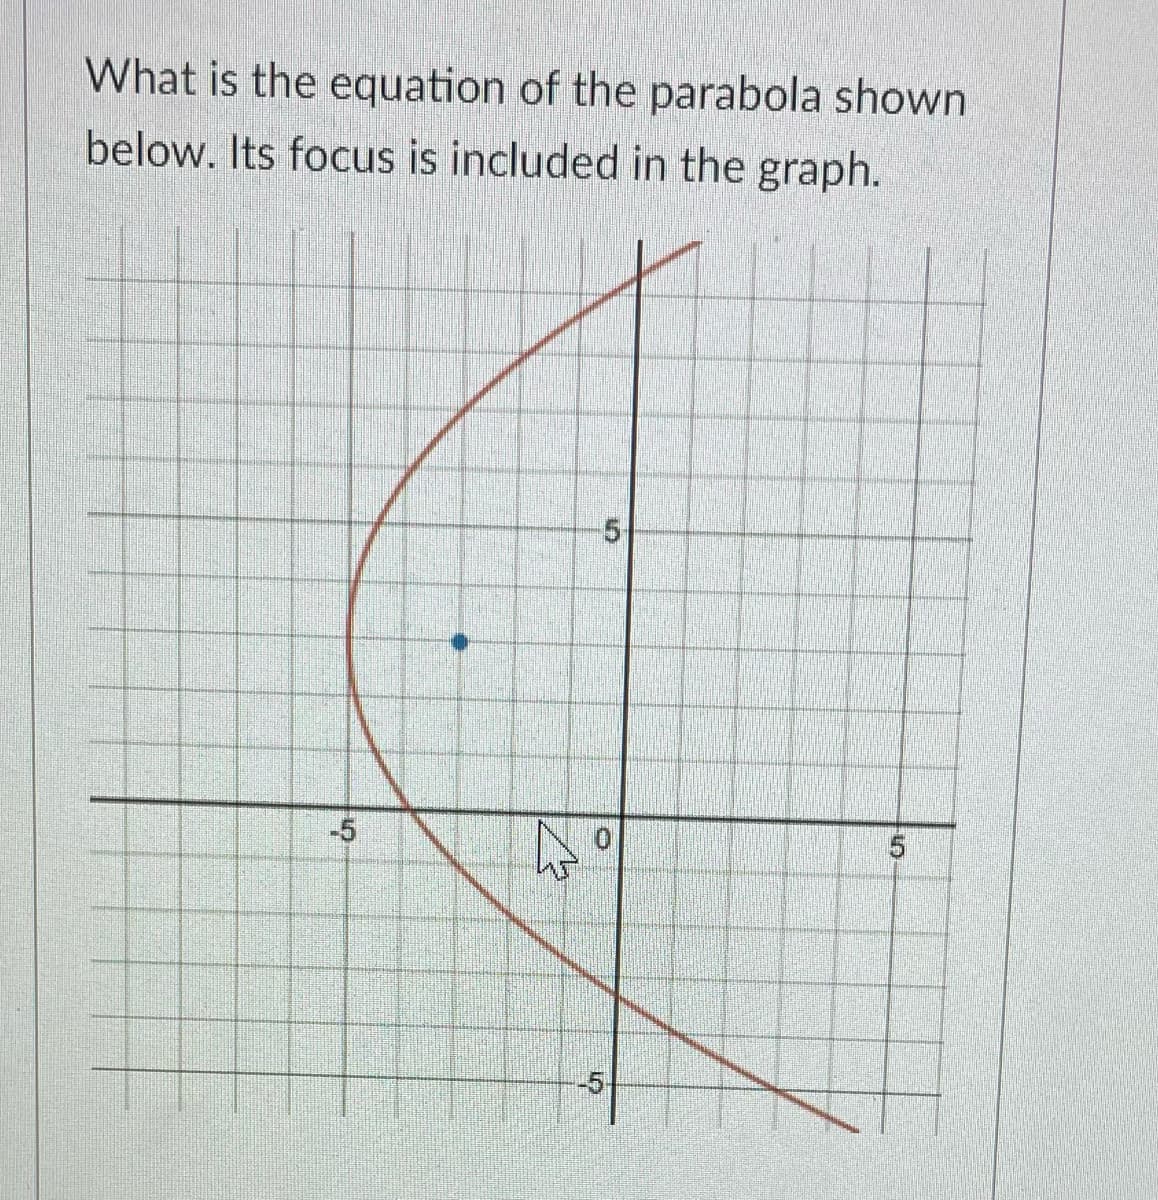 What is the equation of the parabola shown
below. Its focus is included in the graph.
-5
-5
5.
